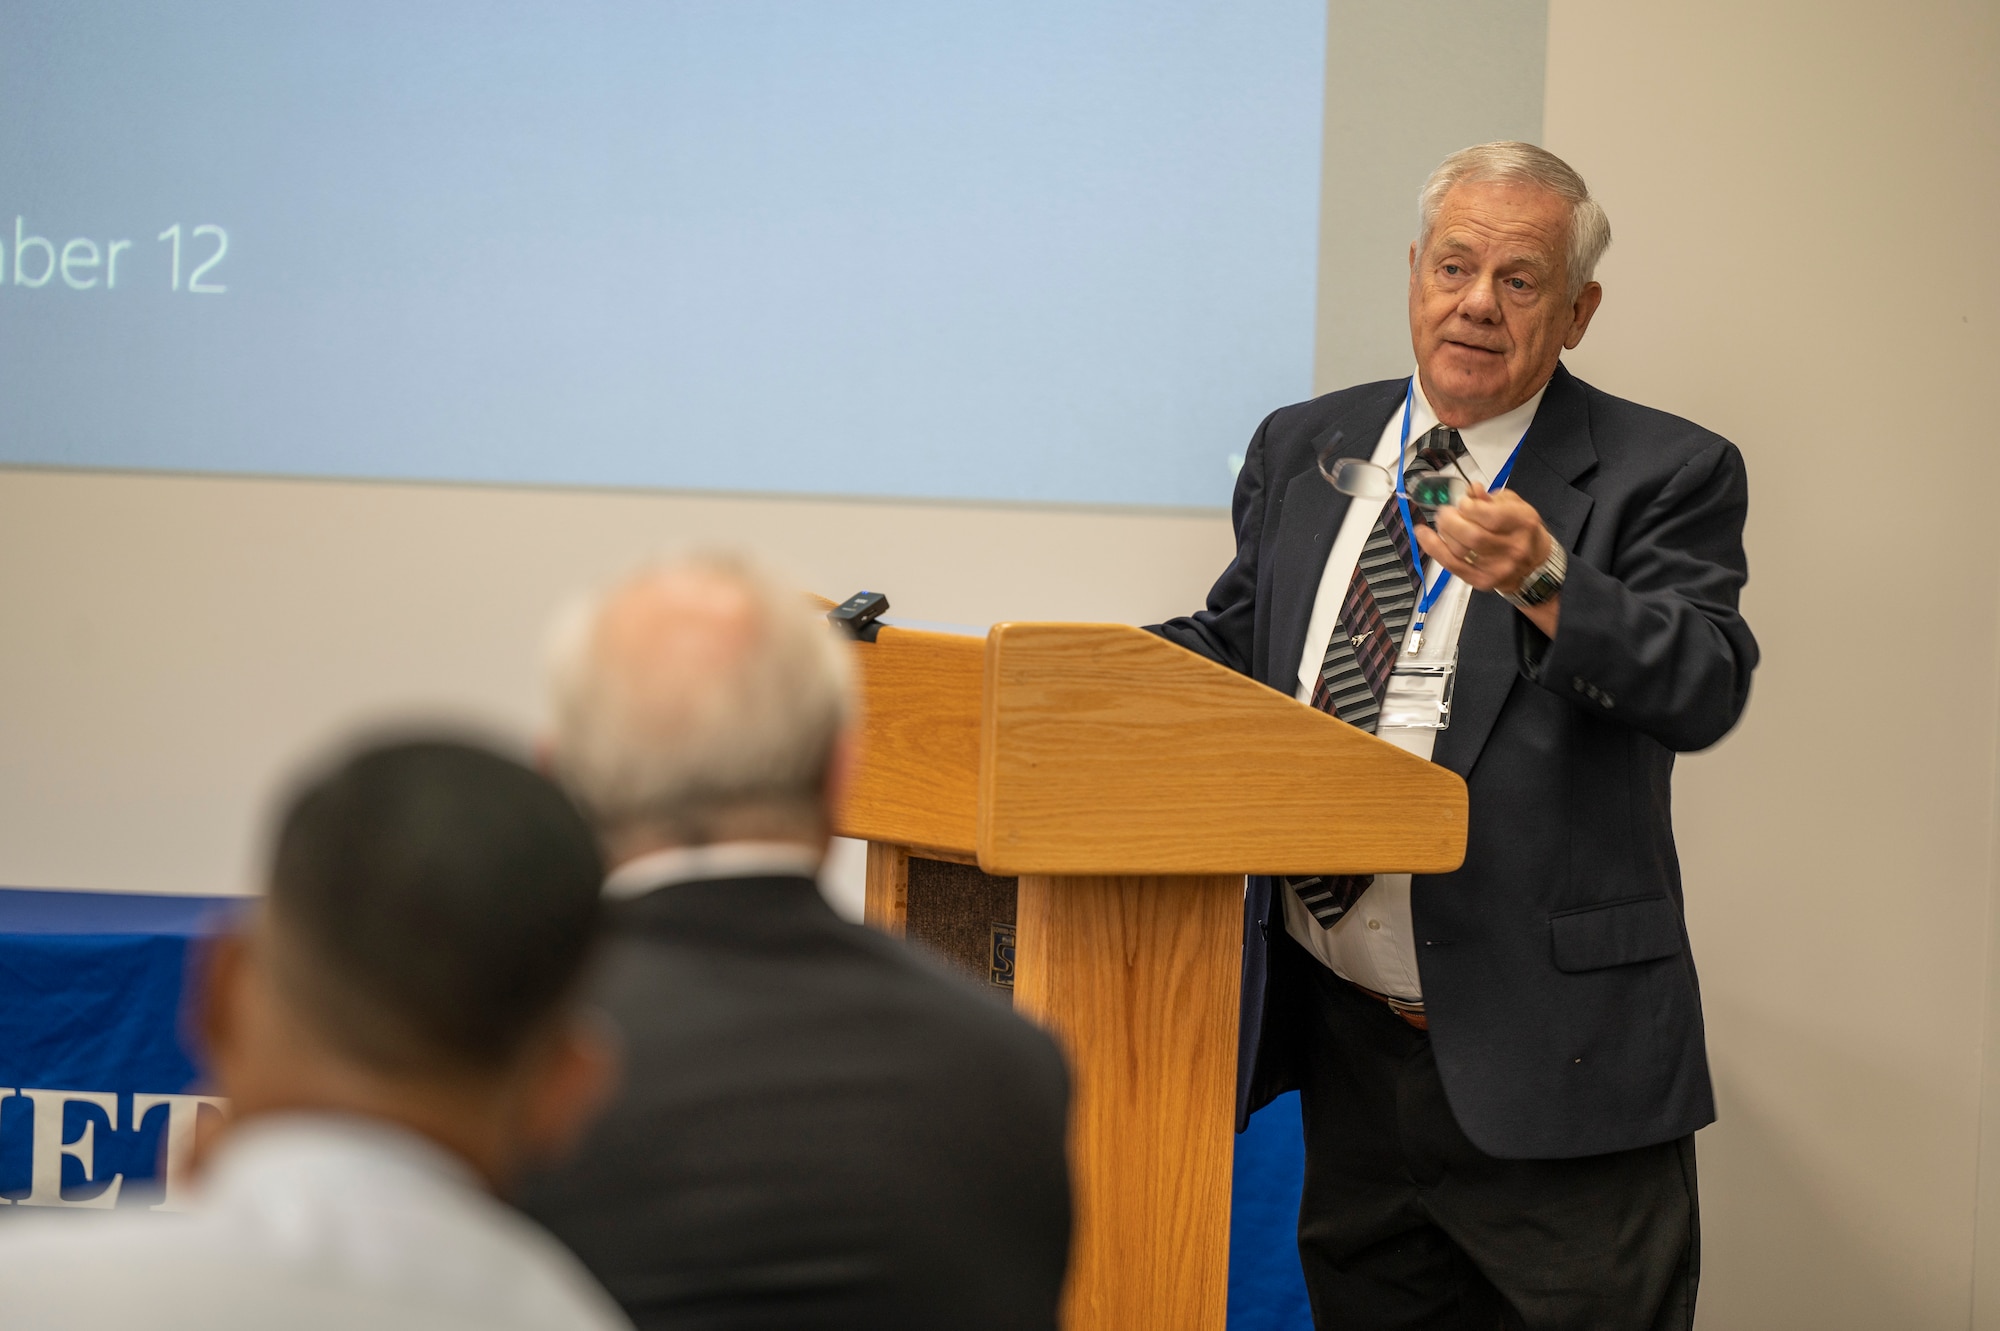 David Baker, former Air Force Metrology and Calibration Program deputy director, speaks during a commemoration ceremony at the Air Force Primary Standards Lab at Heath, Ohio Sept. 12, 2022.